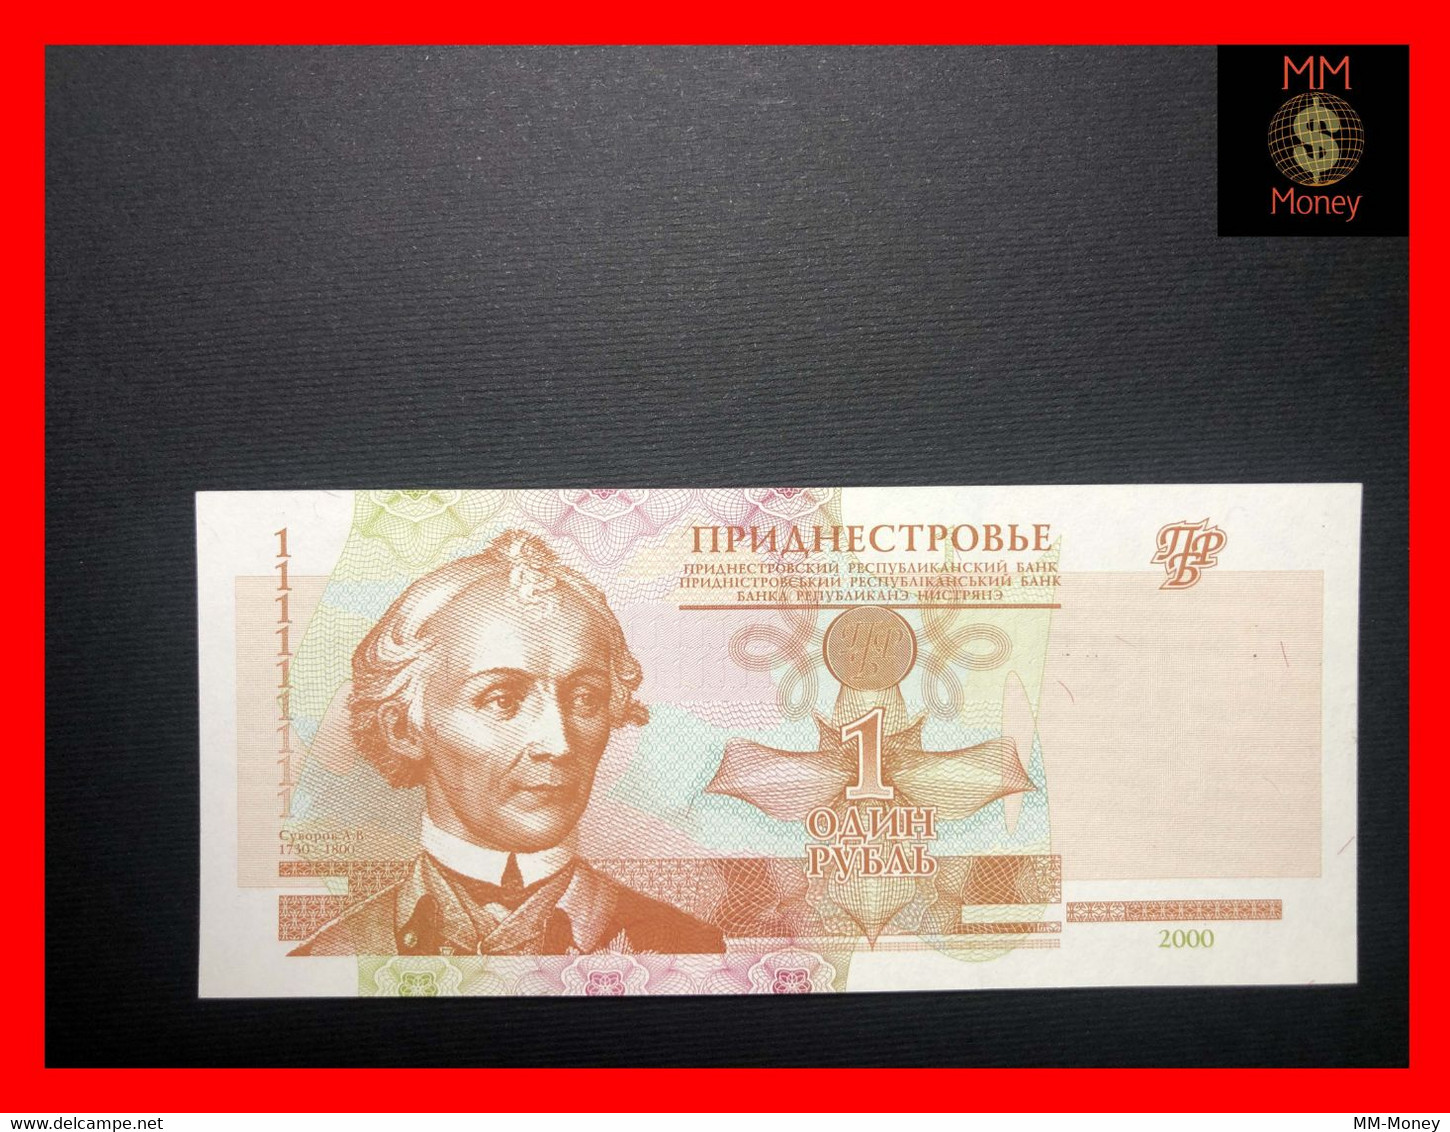 TRANSNISTRIA 1 Ruble  2000 P. 34  " Nice Serial  AB 2 111111 " UNC - Andere - Europa